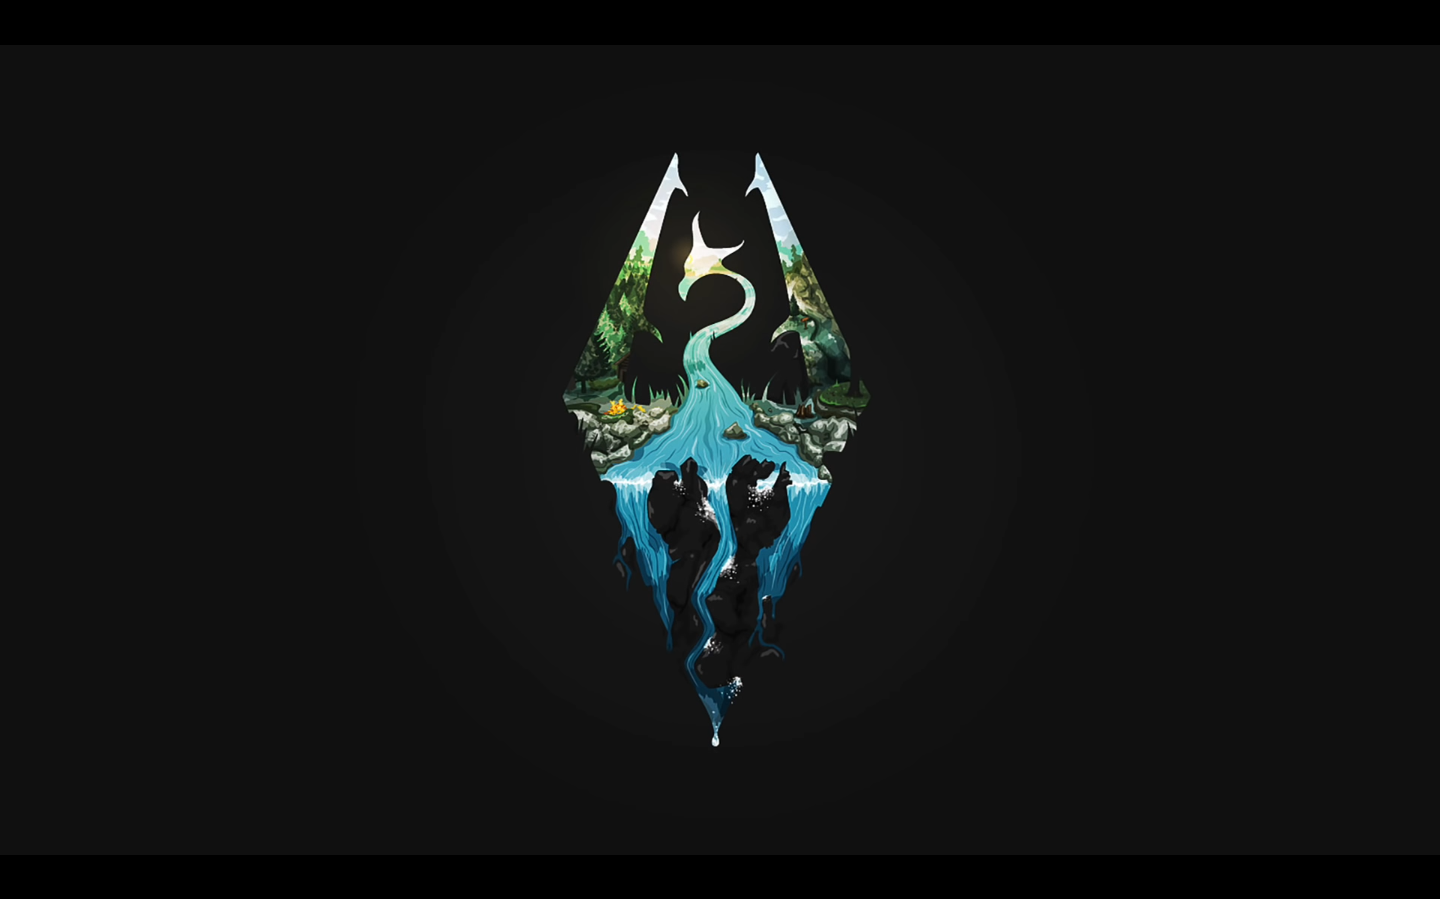 Cool Wallpaper I Found On A Video R Skyrim